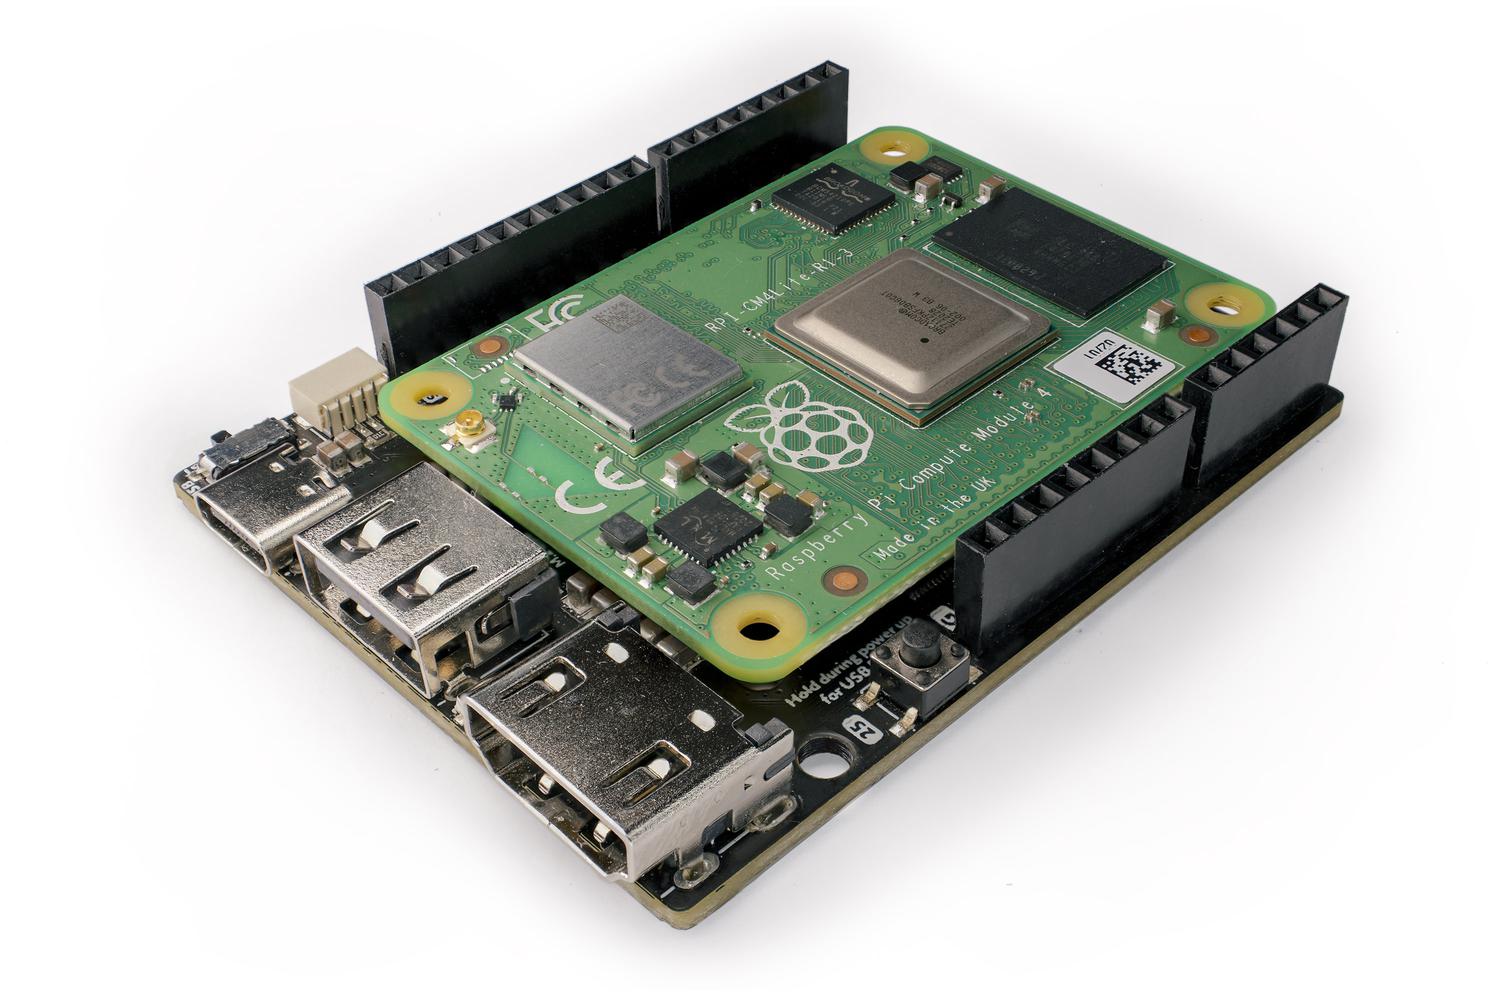                       Machine Learning             
                      Embedded Linux Boards             
                      Raspberry Pi     